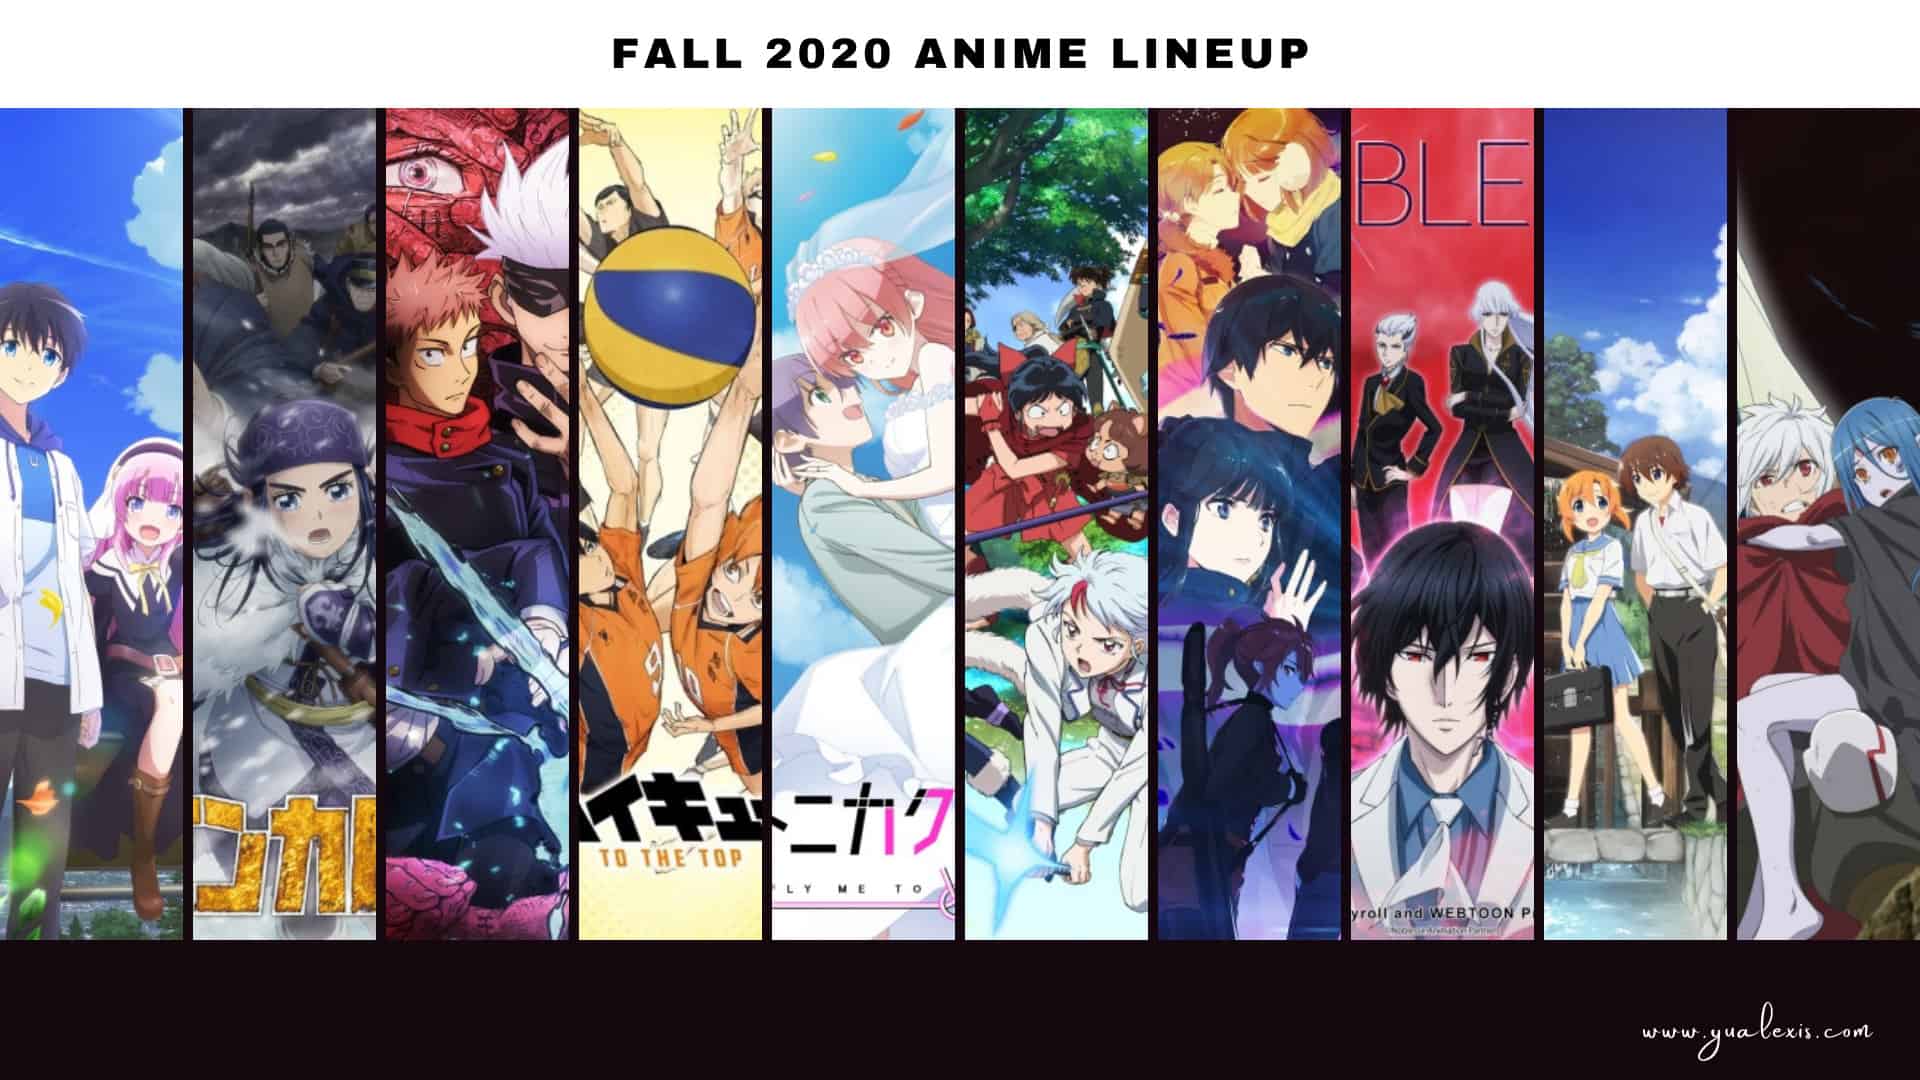 The Fall 2020 Anime Lineup What’s In My Watchlist Next Season? Yu